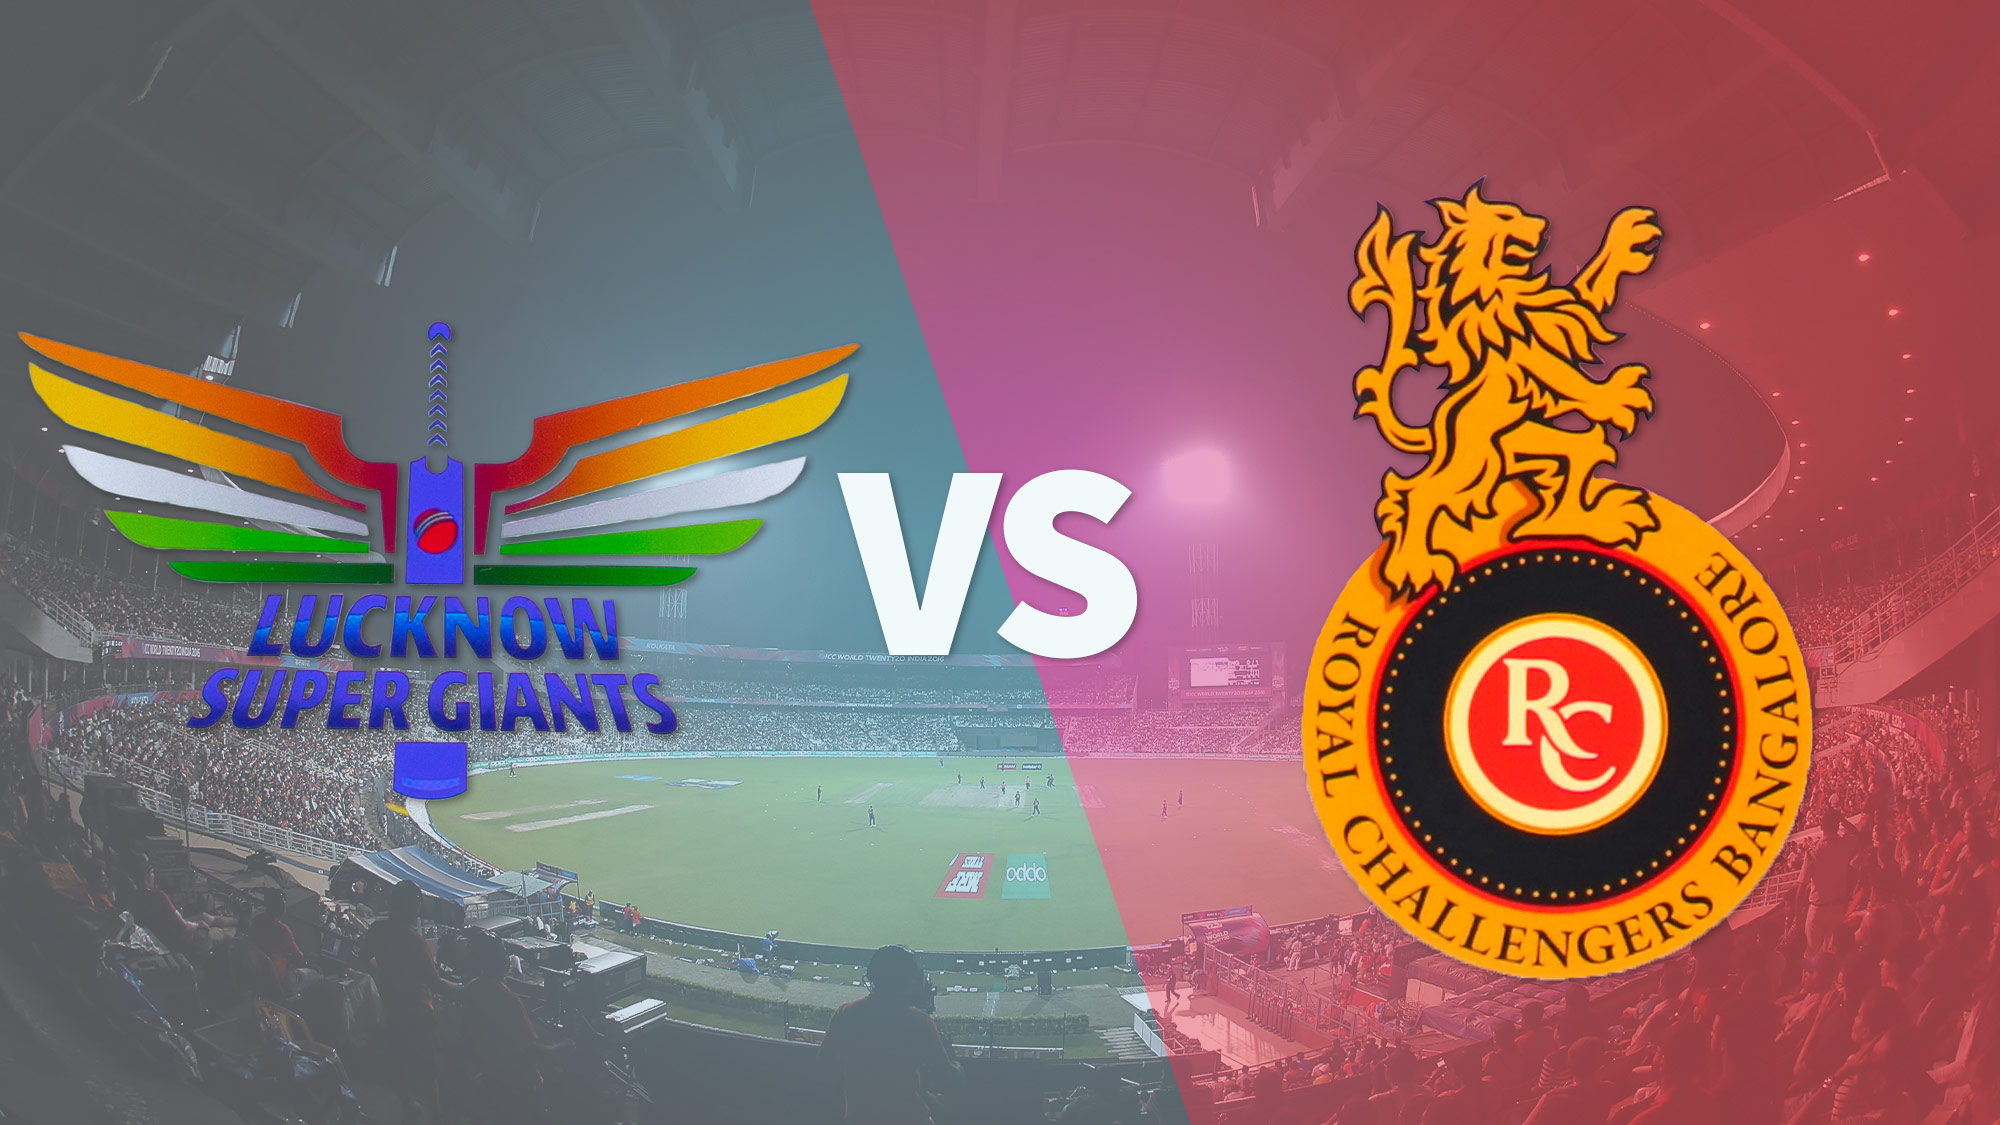 The Lucknow Super Giants and Royal Challengers Bangalore logos against a background of Eden Gardens stadium in Kolkata